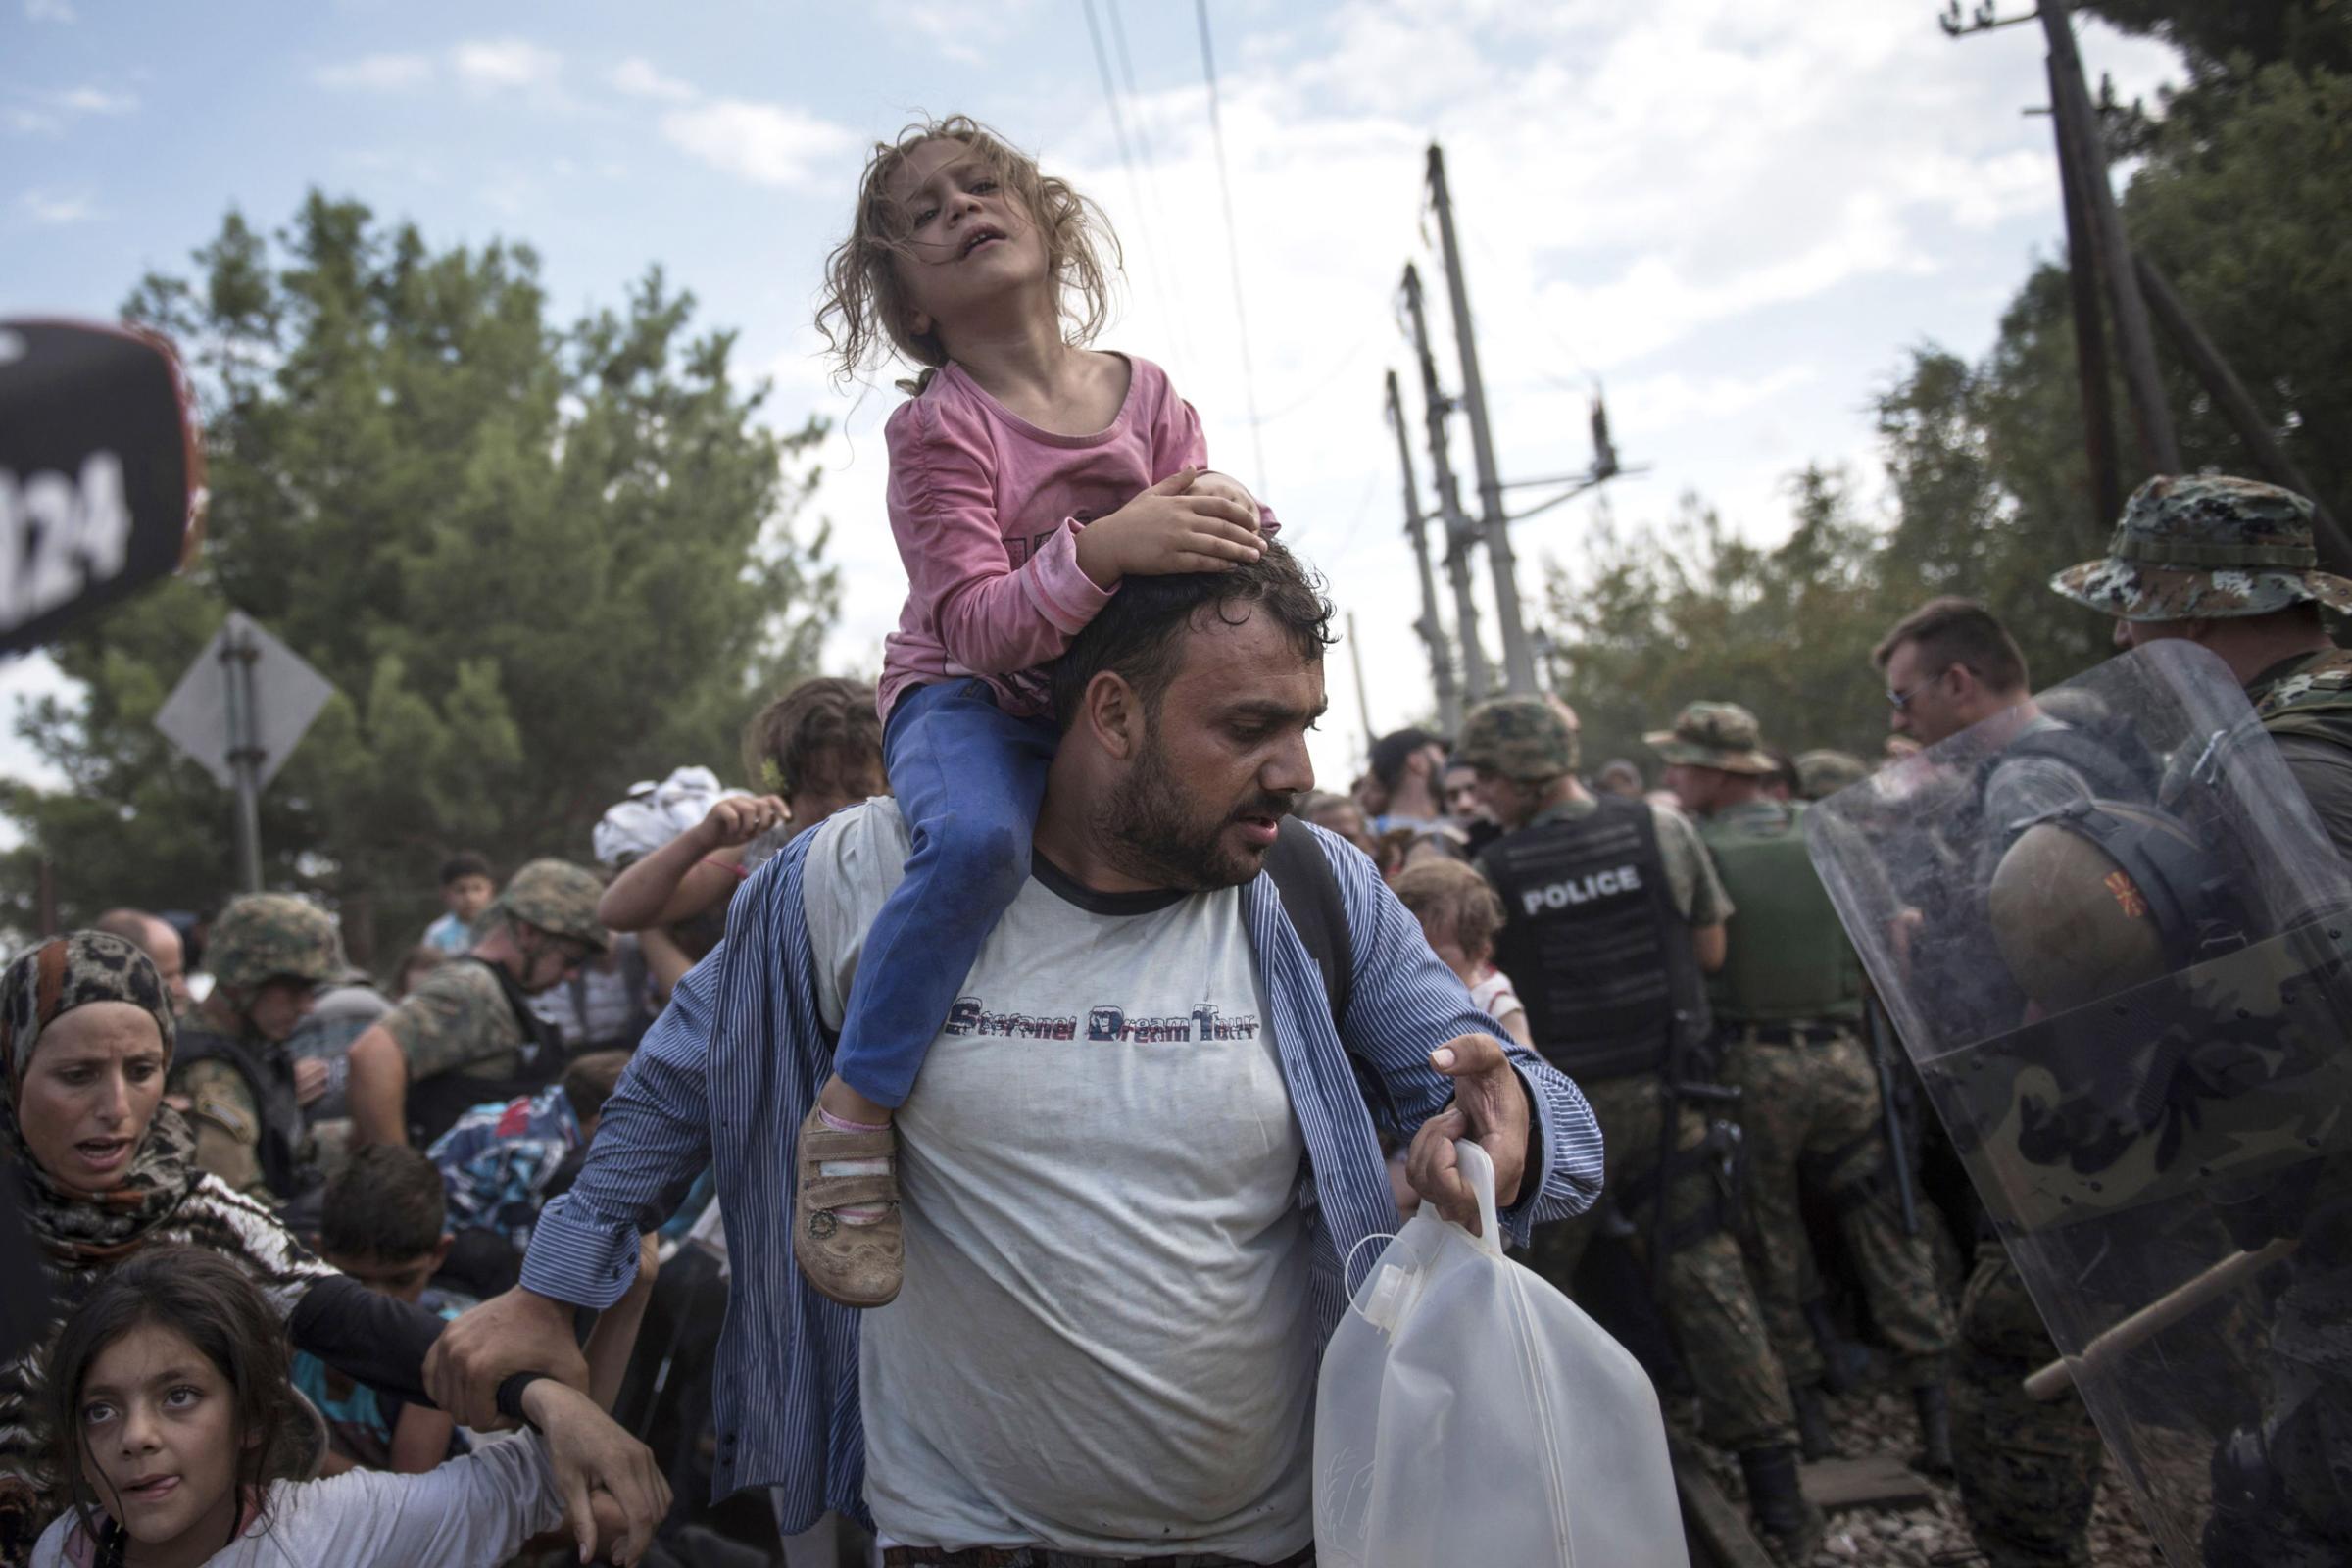 Mandatory Credit: Photo by NurPhoto/REX Shutterstock (2805163n) A migrant child and her father pass through the cordon of policeman and enter Macedonia, after they and other migrants were waiting on the Macedonian-Greek border where they are being held, since Macedonia declared emergency at its borders and closed its south border for them Macedonia blocks its border with Greece, Gevgelija, Macedonia - 21 Aug 2015 Thousands of them are being held in the zone between Greece and Macedonia.